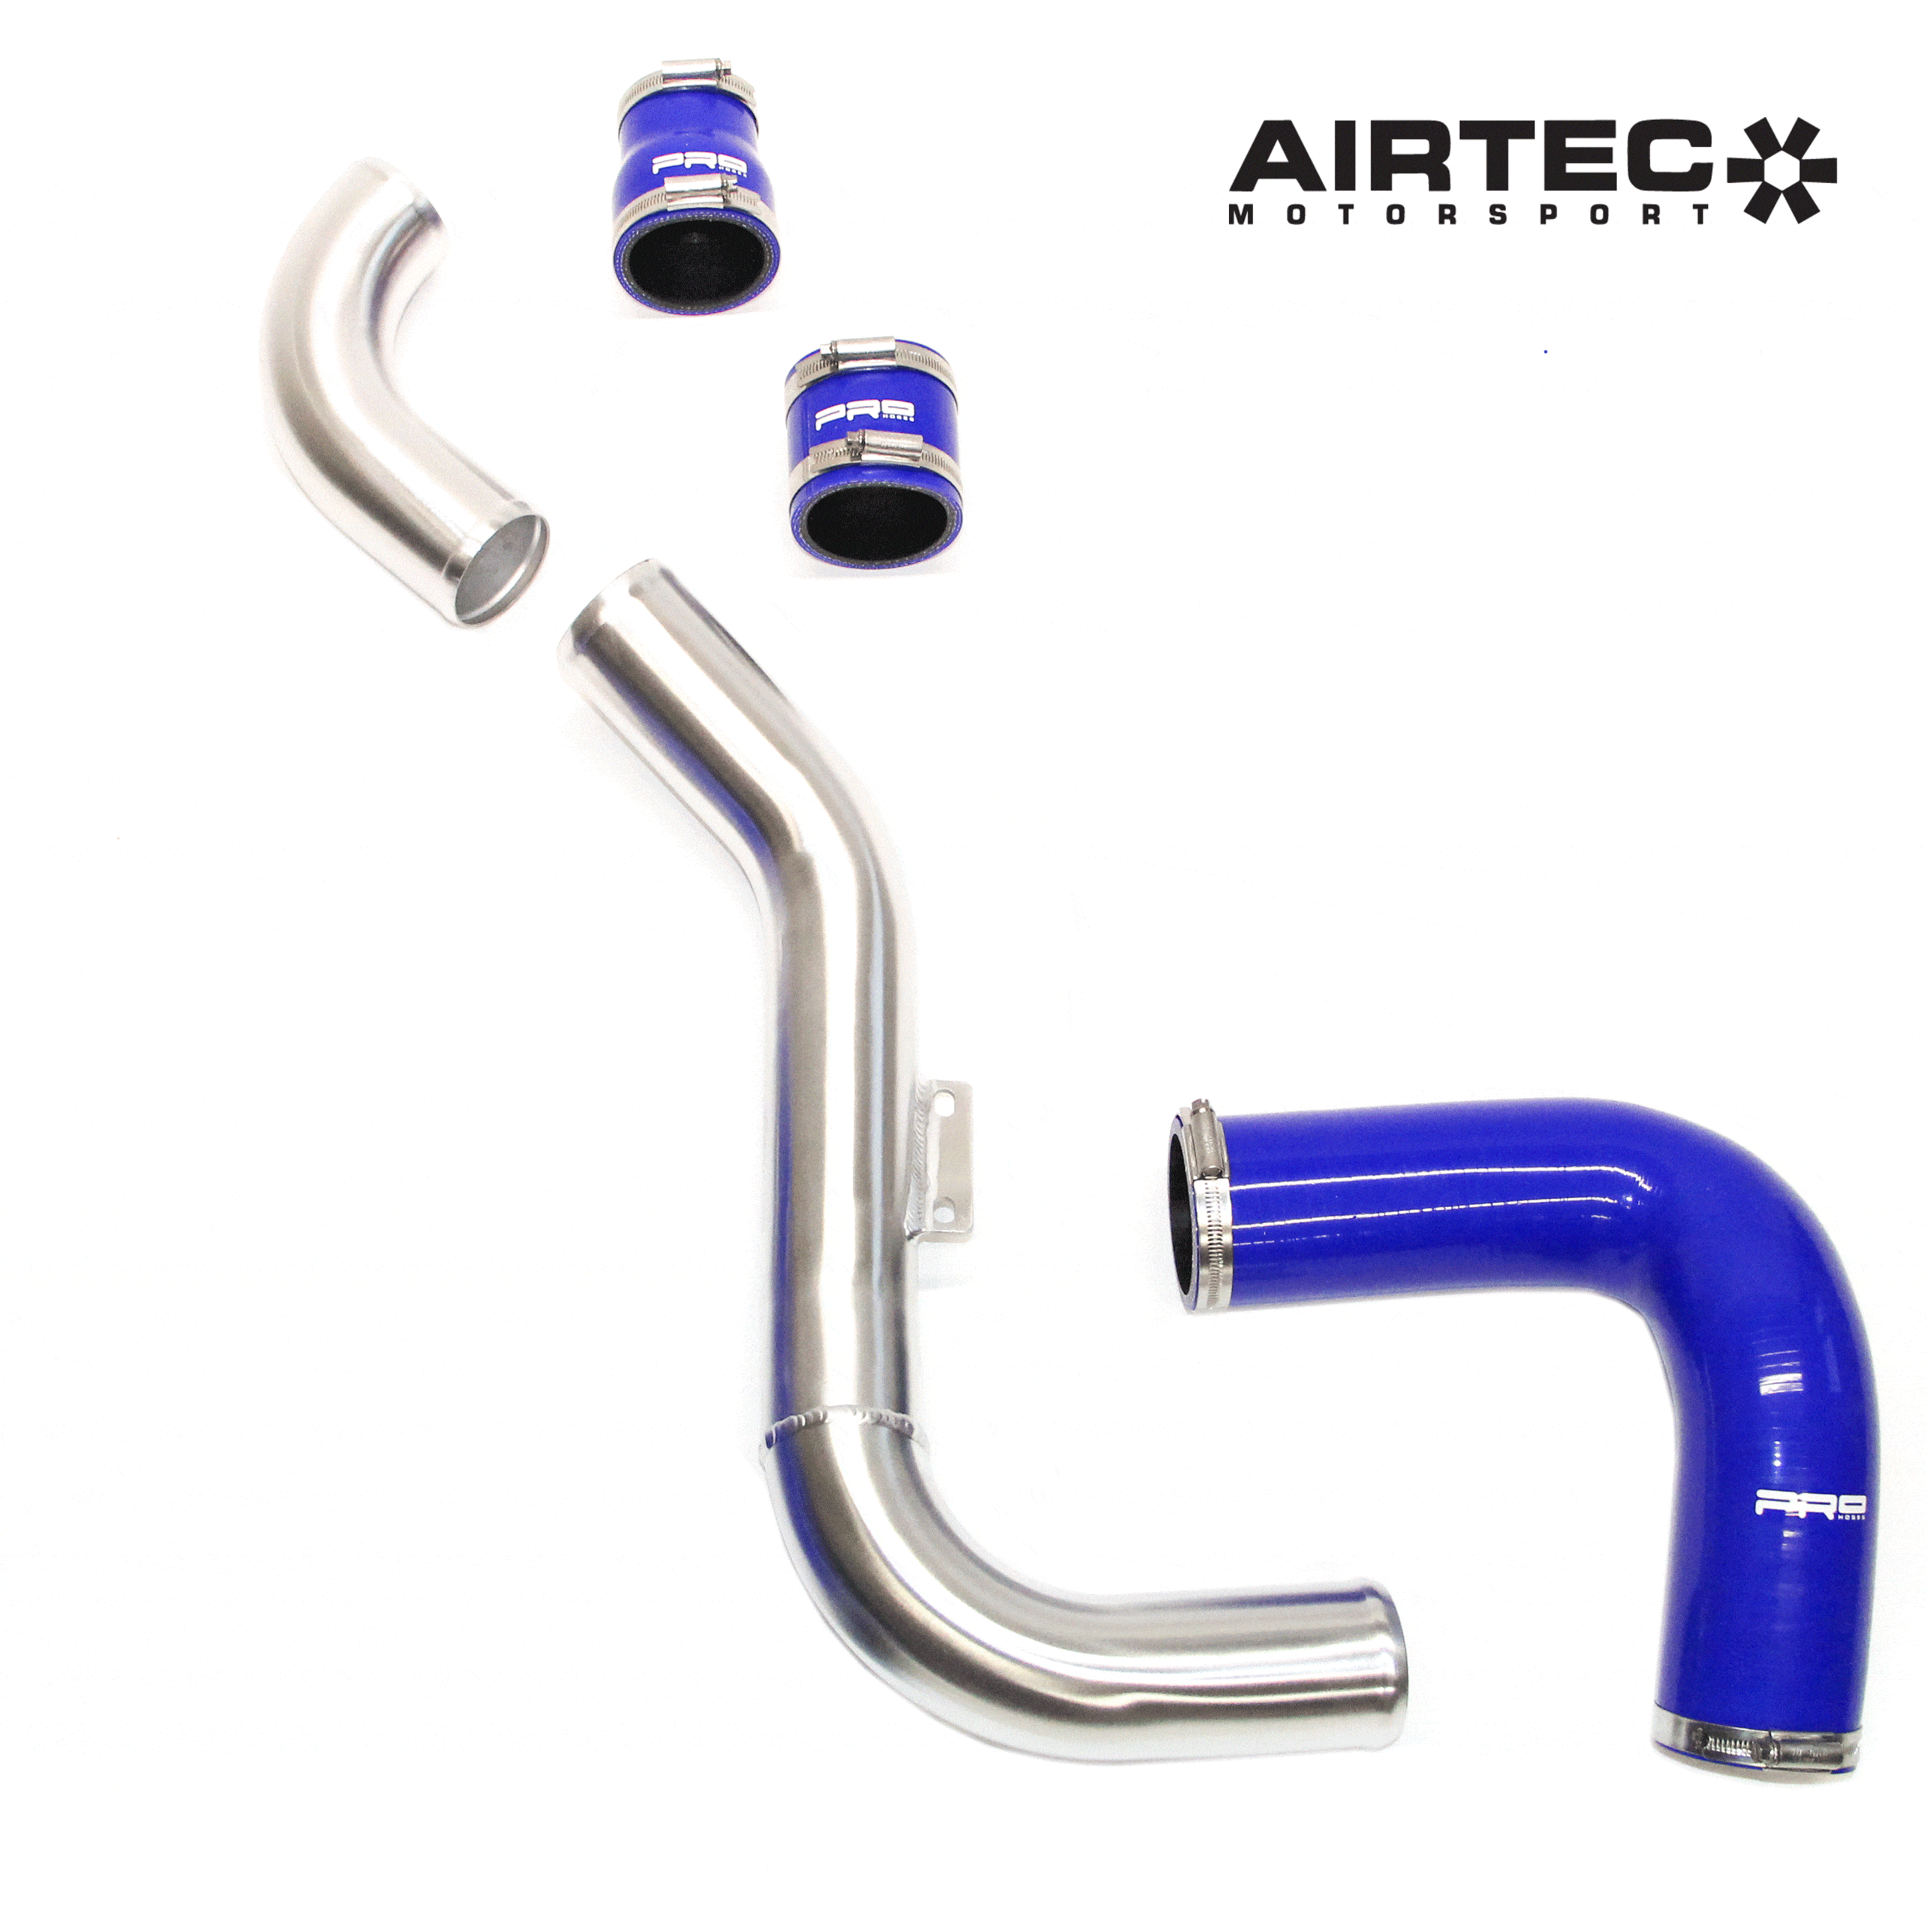 Airtec Motorsport 2.5-inch Big Boost Pipe Kit – Hotside Only - Wayside Performance 